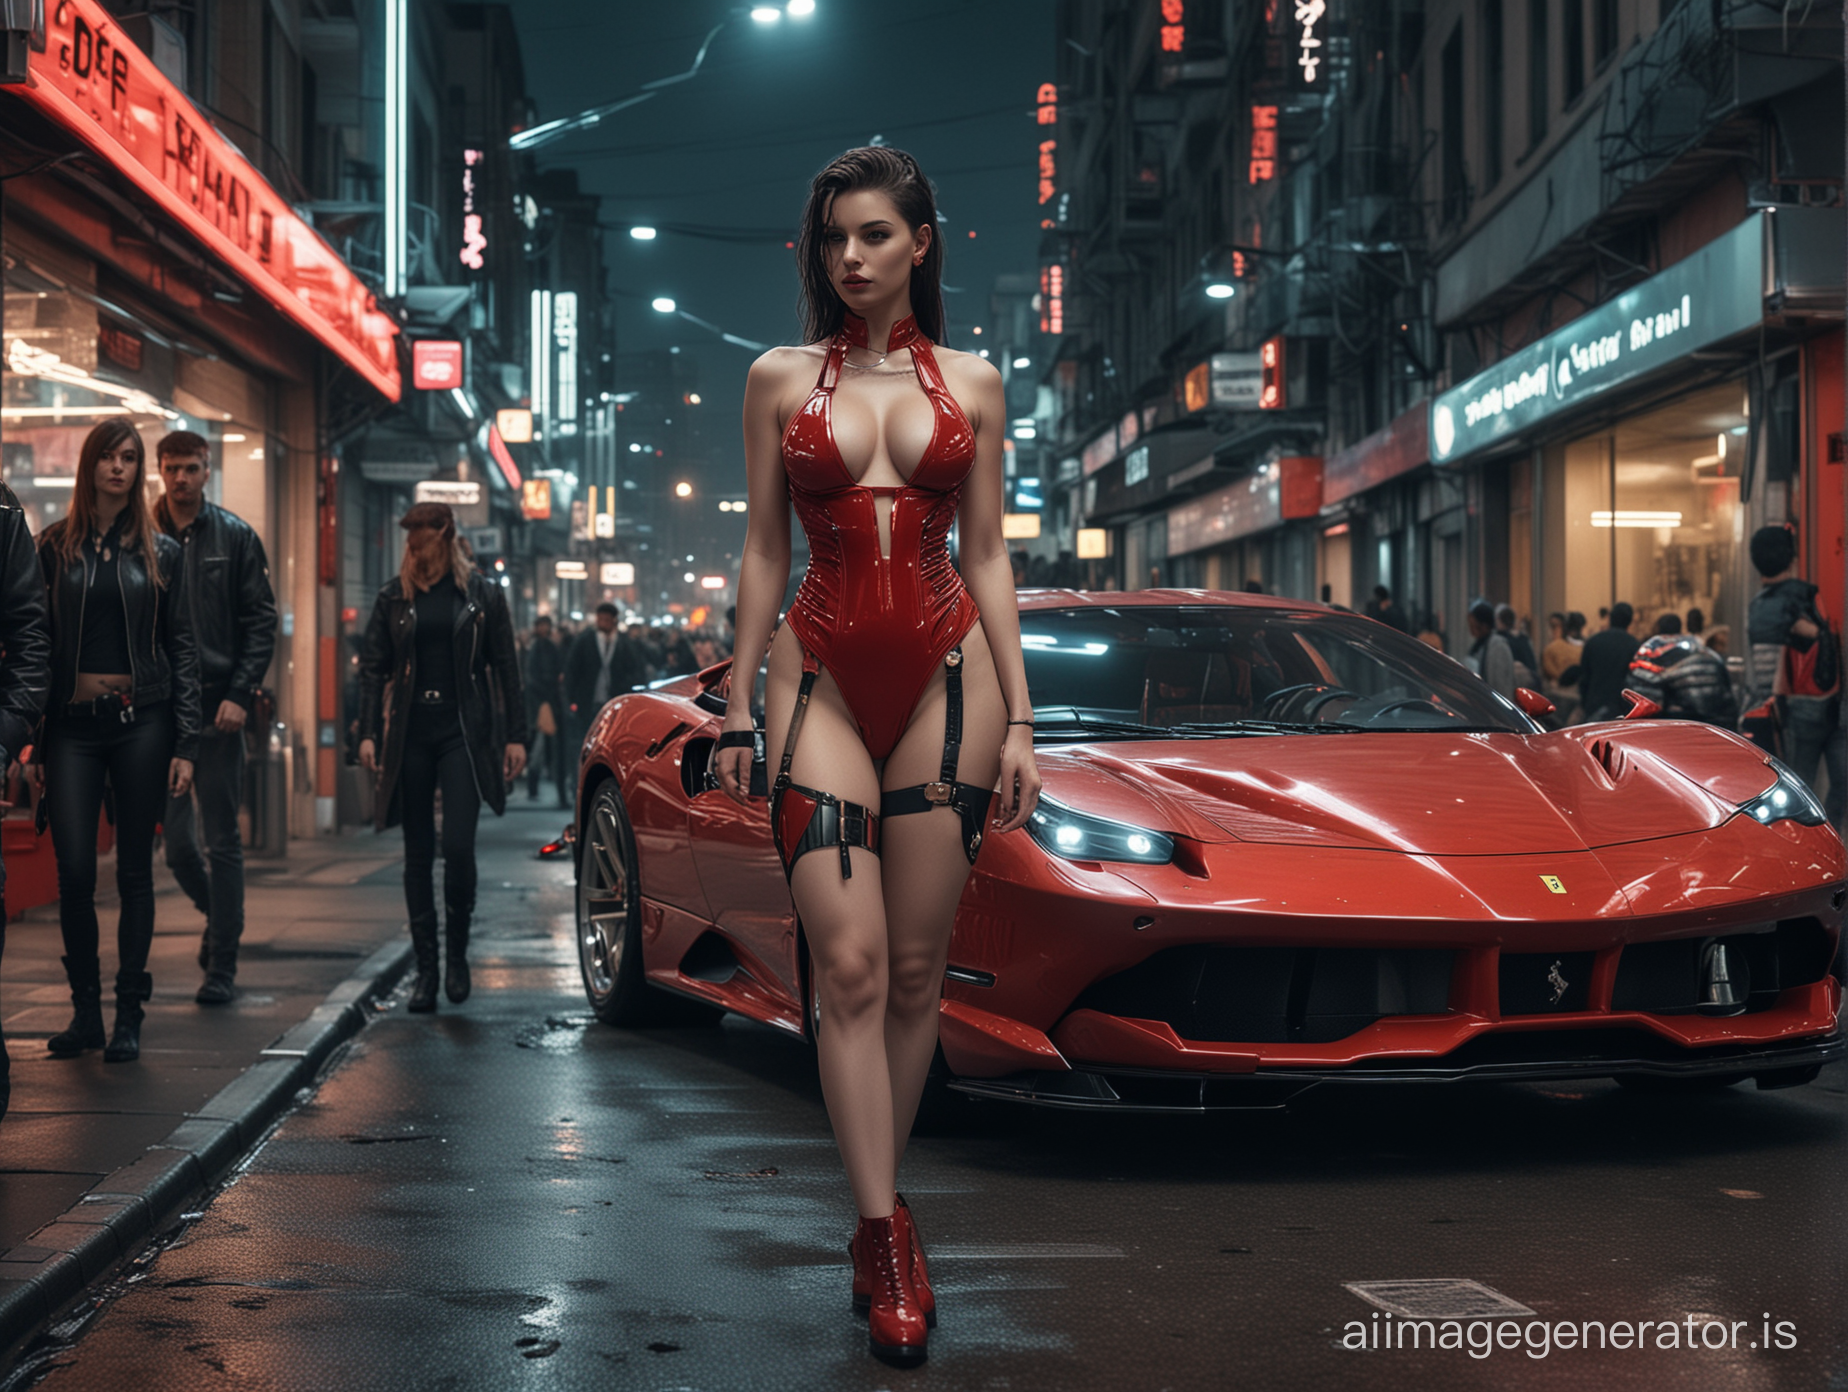 Cyberpunk enhanced and modded Ferrari (centered horizontally in frame) parked in a busy cyberpunk city, people walking on the sidewalk.
Beautiful scantilly clad young woman with cyber implants, cyborg elements, standing next to it. Cyberpunk clothing on everyone in the picture. Sci Fi atmosphere. Night, gritty